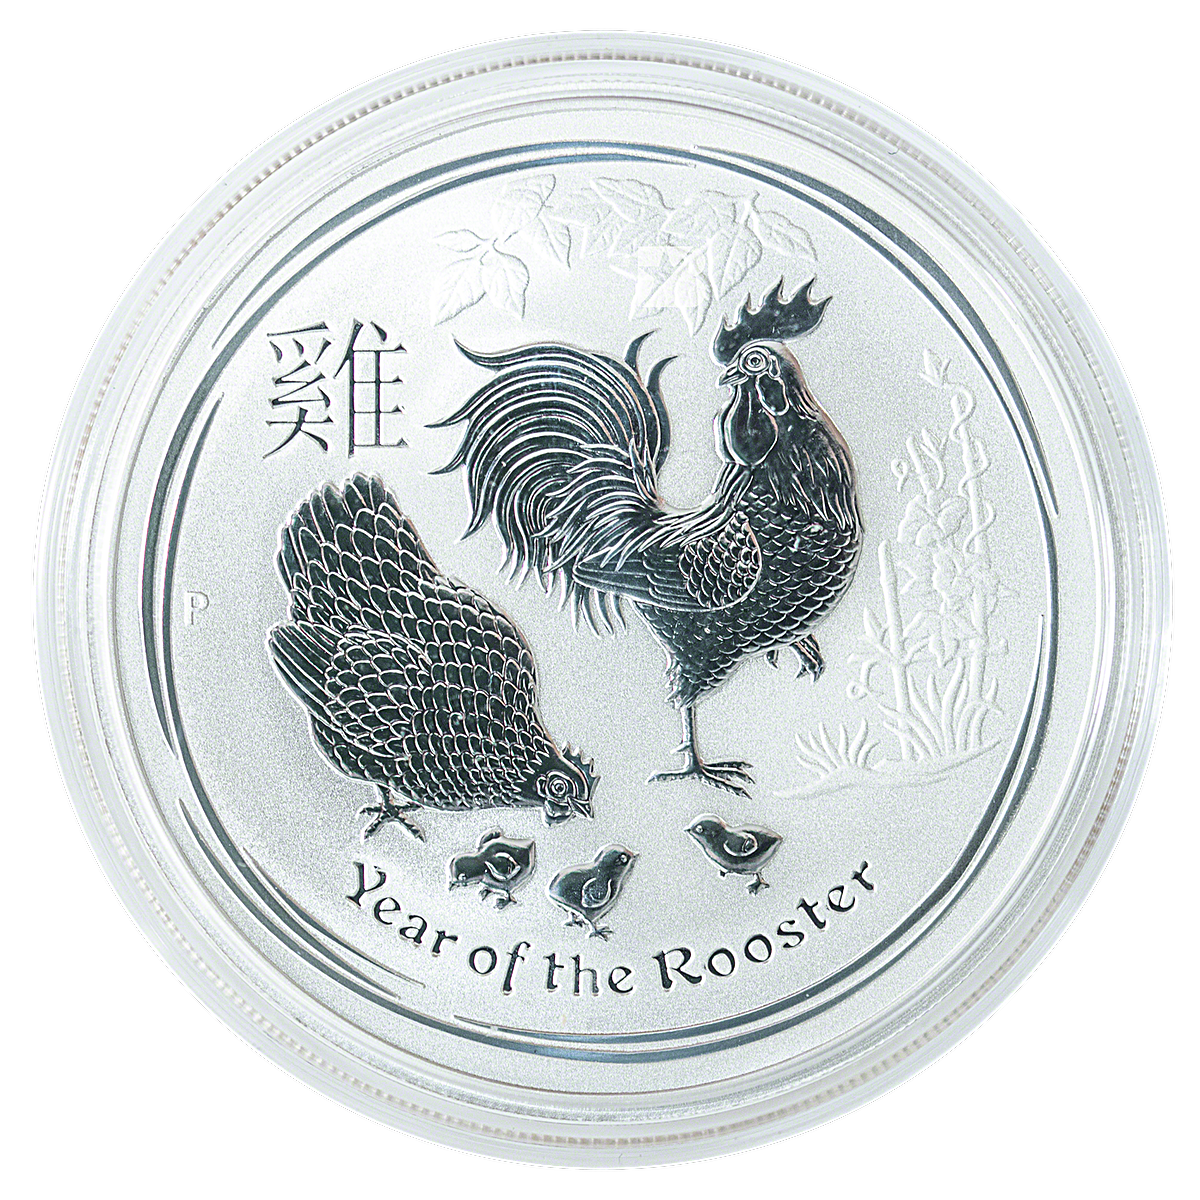 2017  Colored 2 Oz Silver Year Of Rooster Lunar Coin Perth Mint Australia